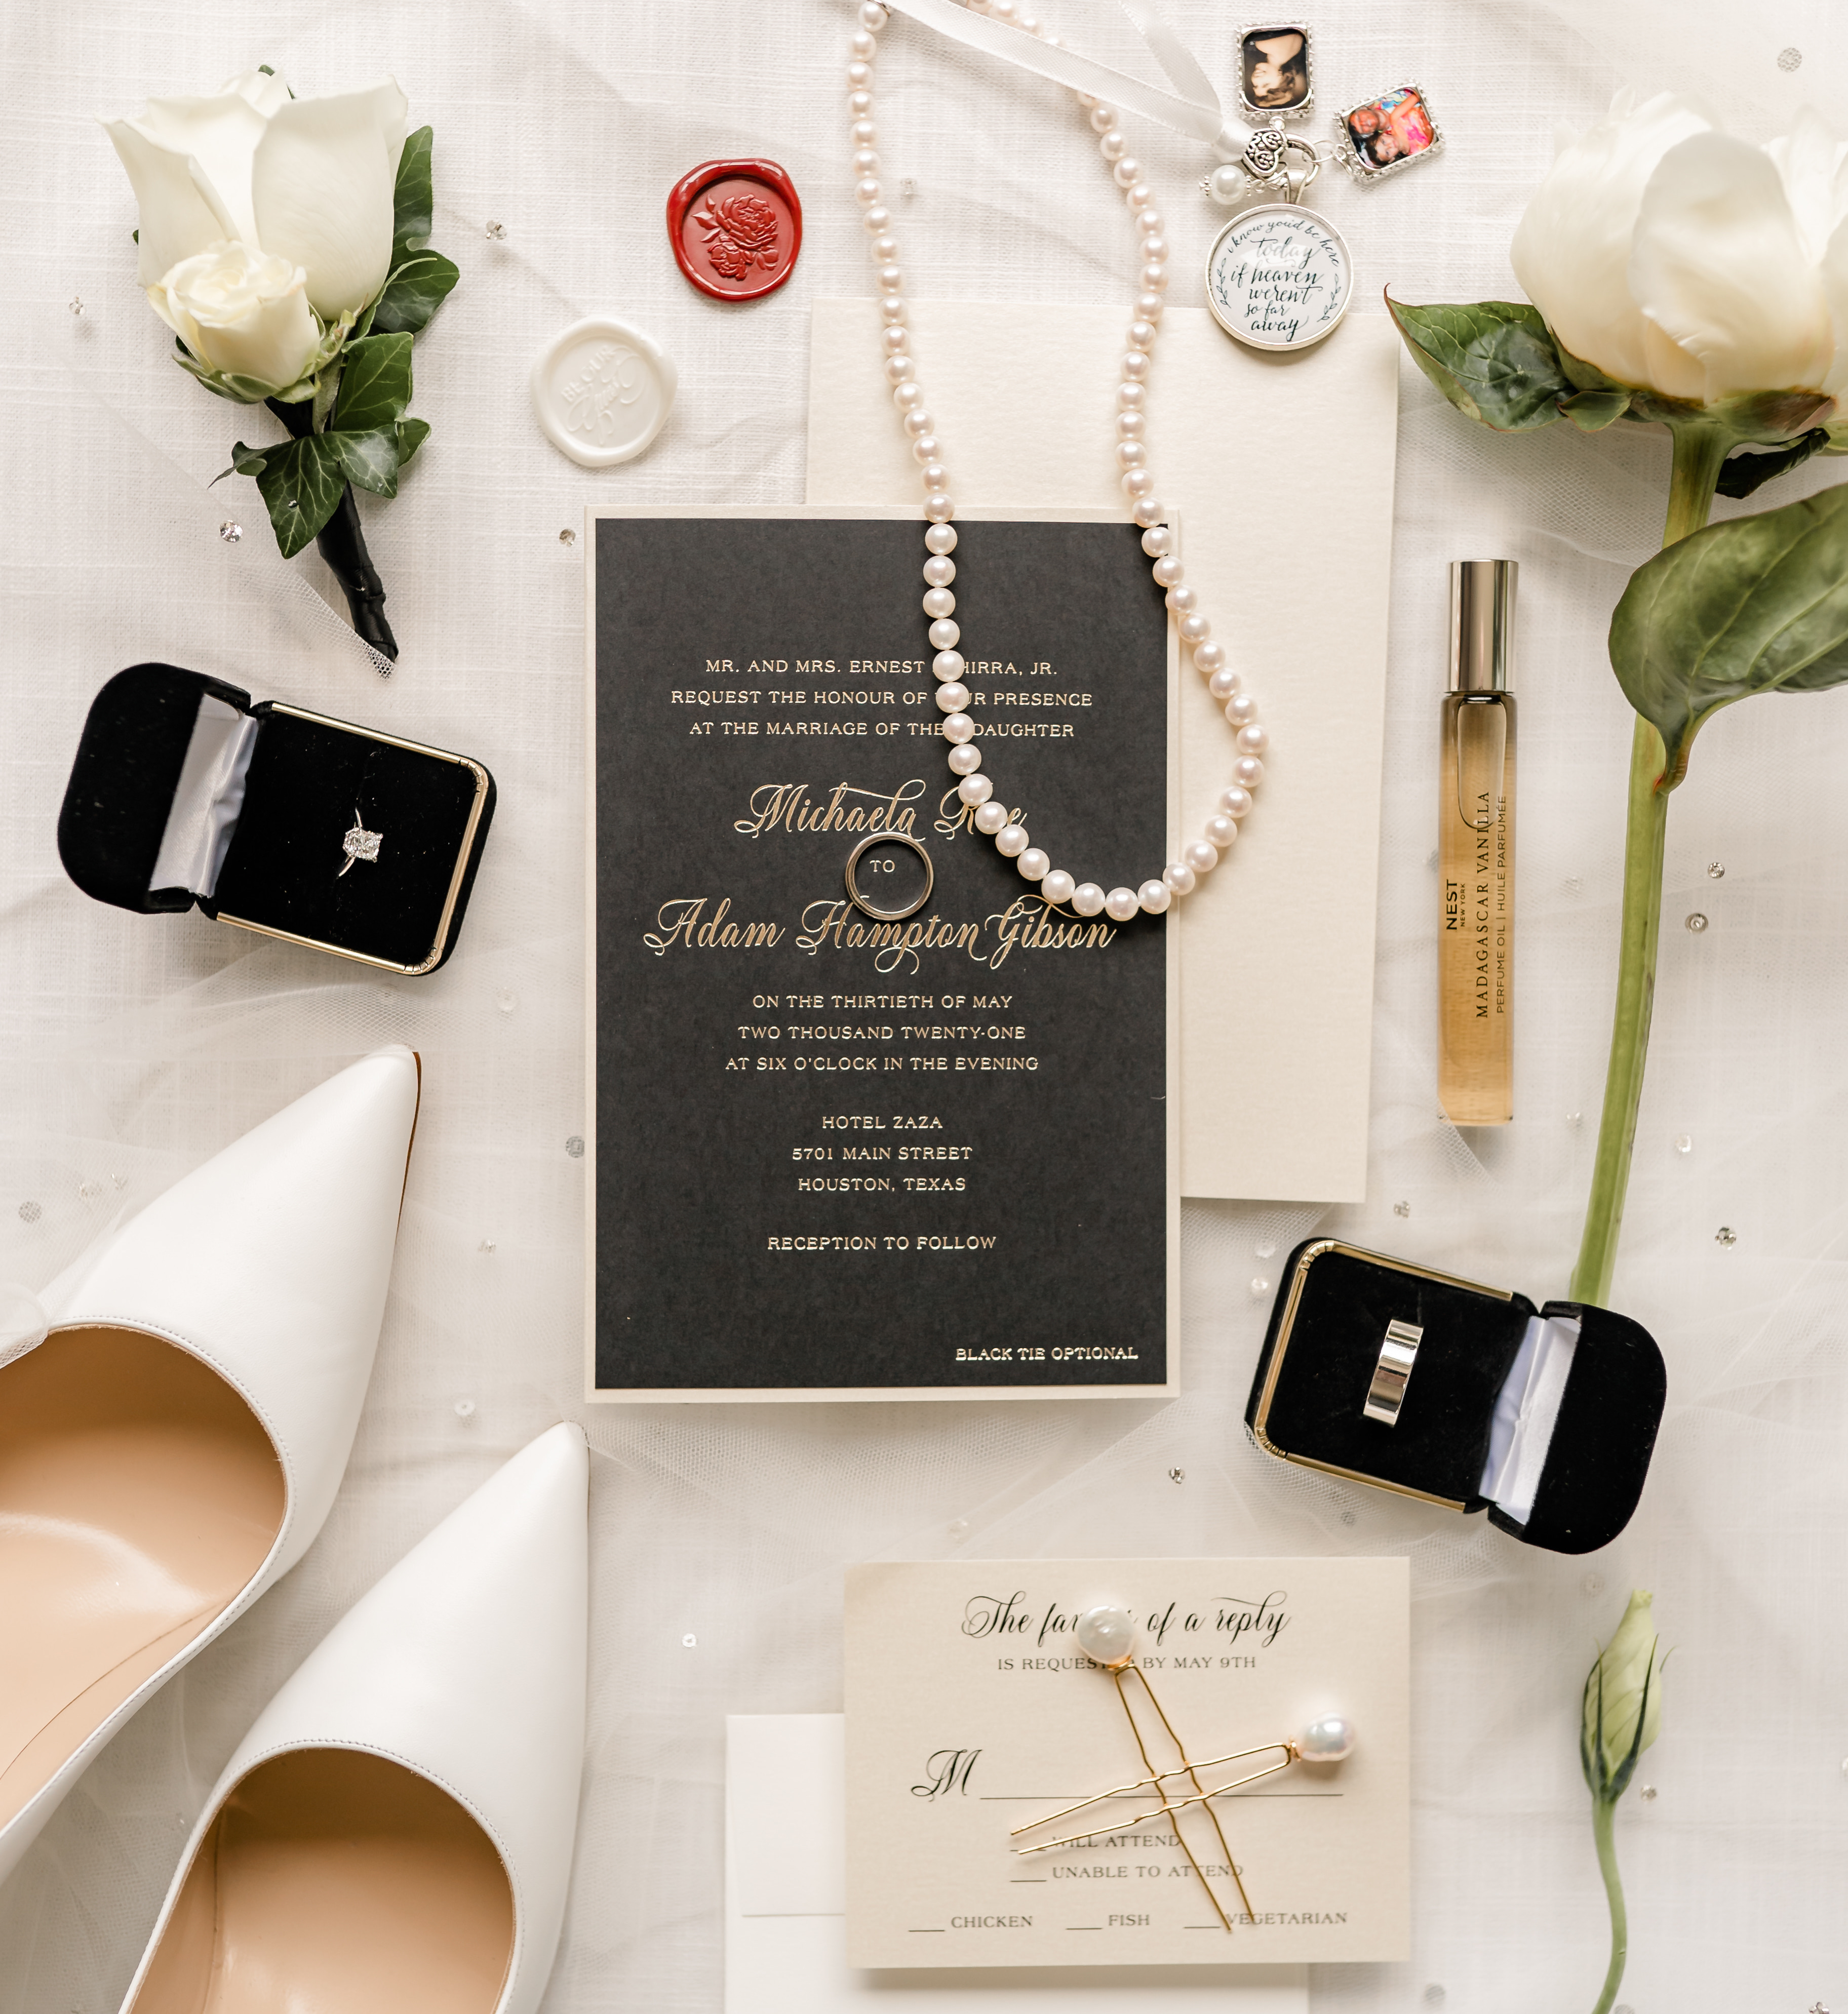 Wedding Invitation Inspiration + Tips From Our Favorite Creative Experts